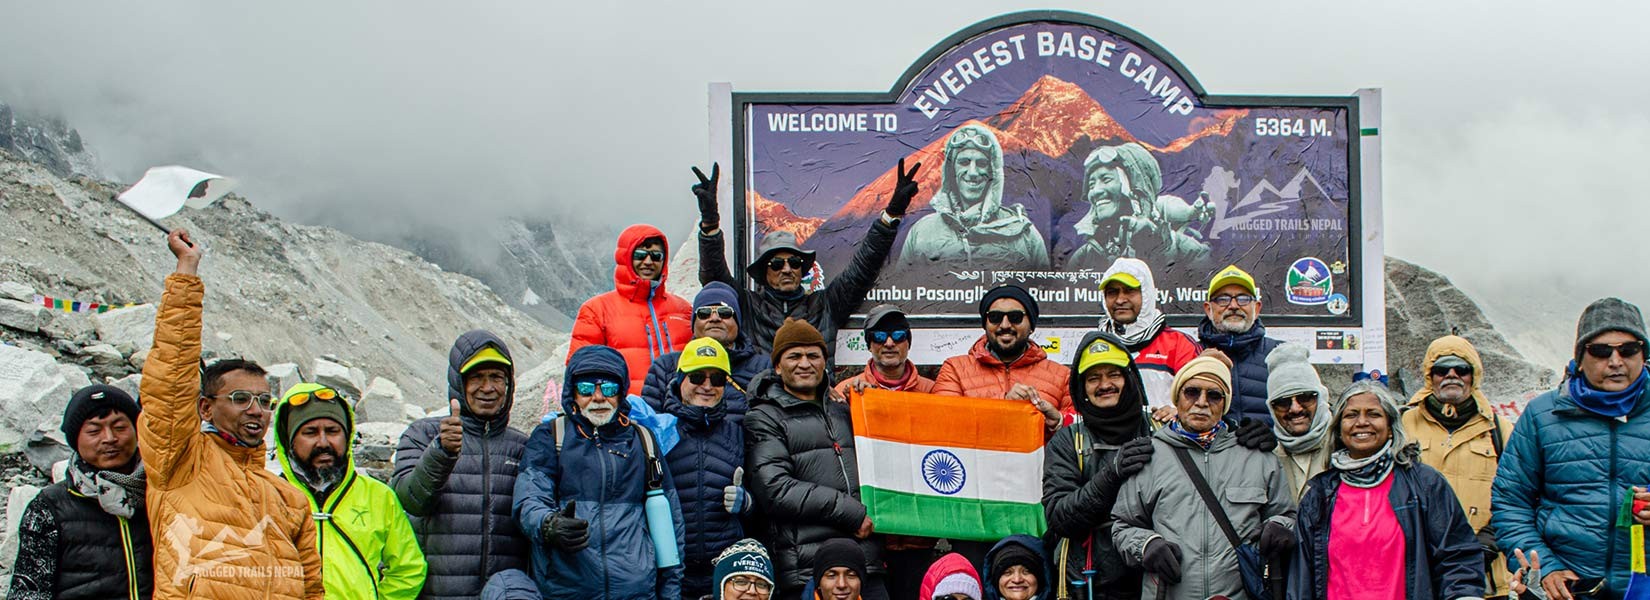 everest base camp trek cost from india